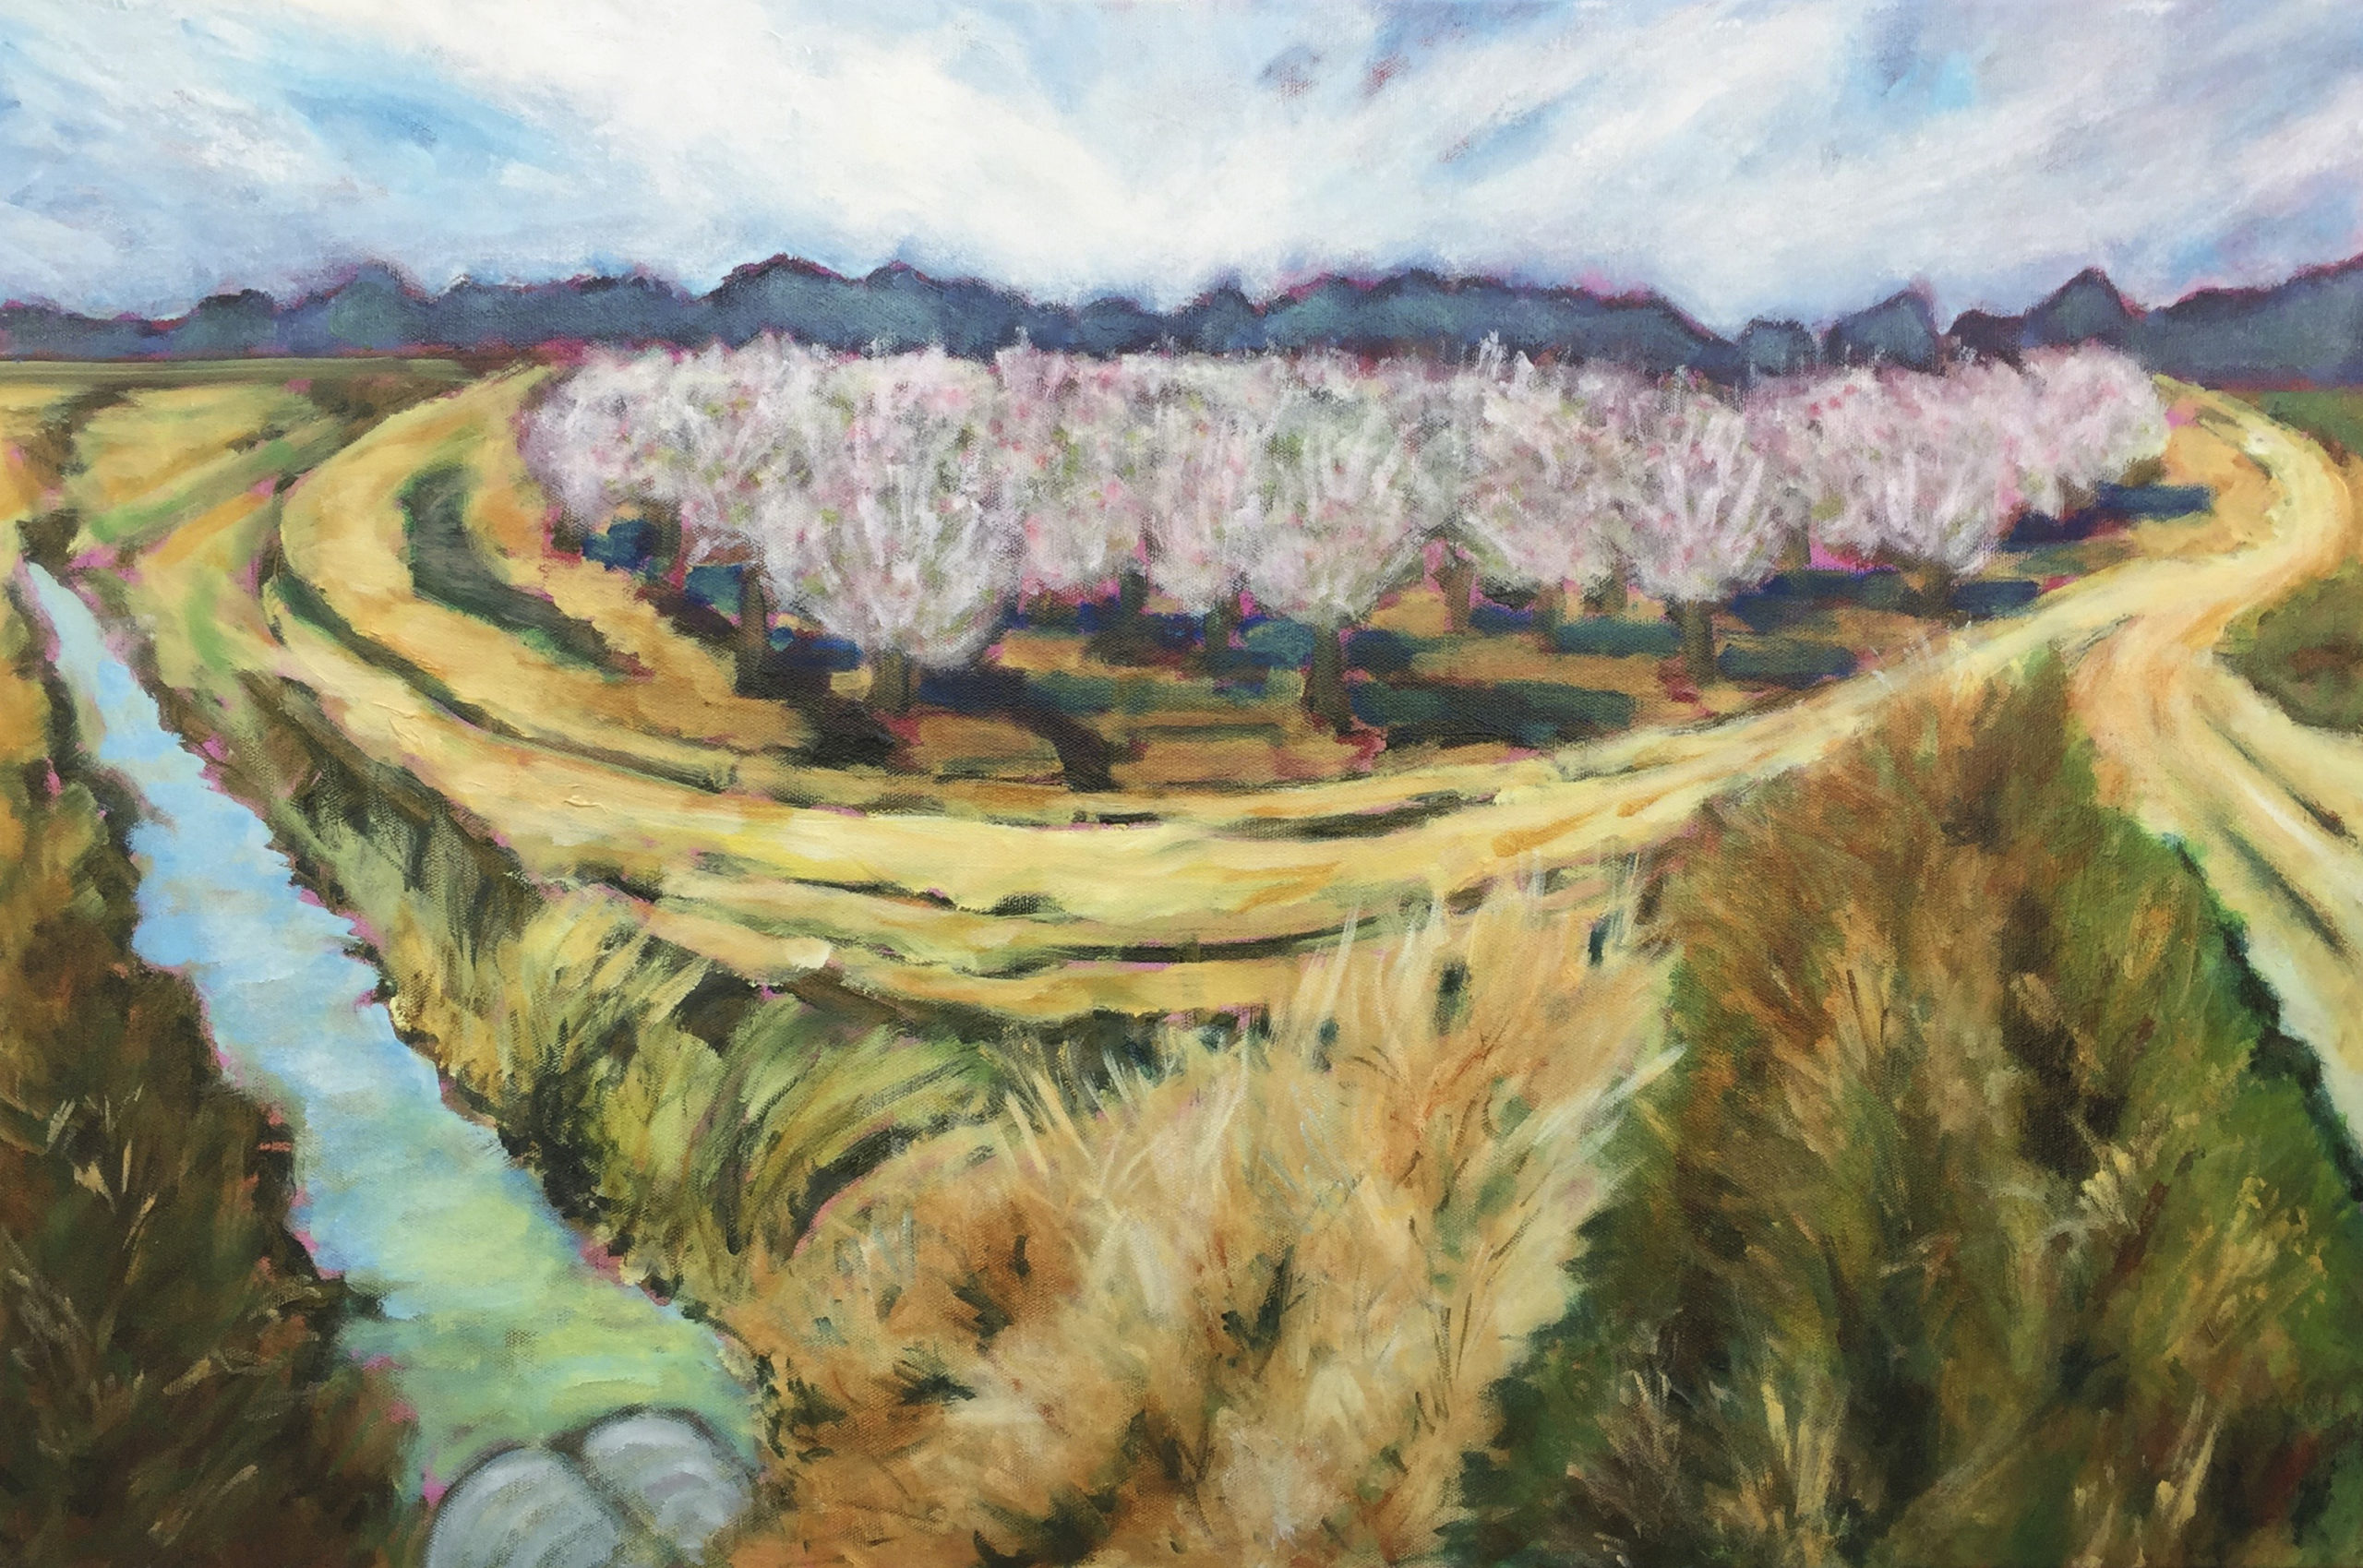 Patrick Cosgrove, Almond Orchard in Bloom, Oil on canvas, 30"x24", $1900